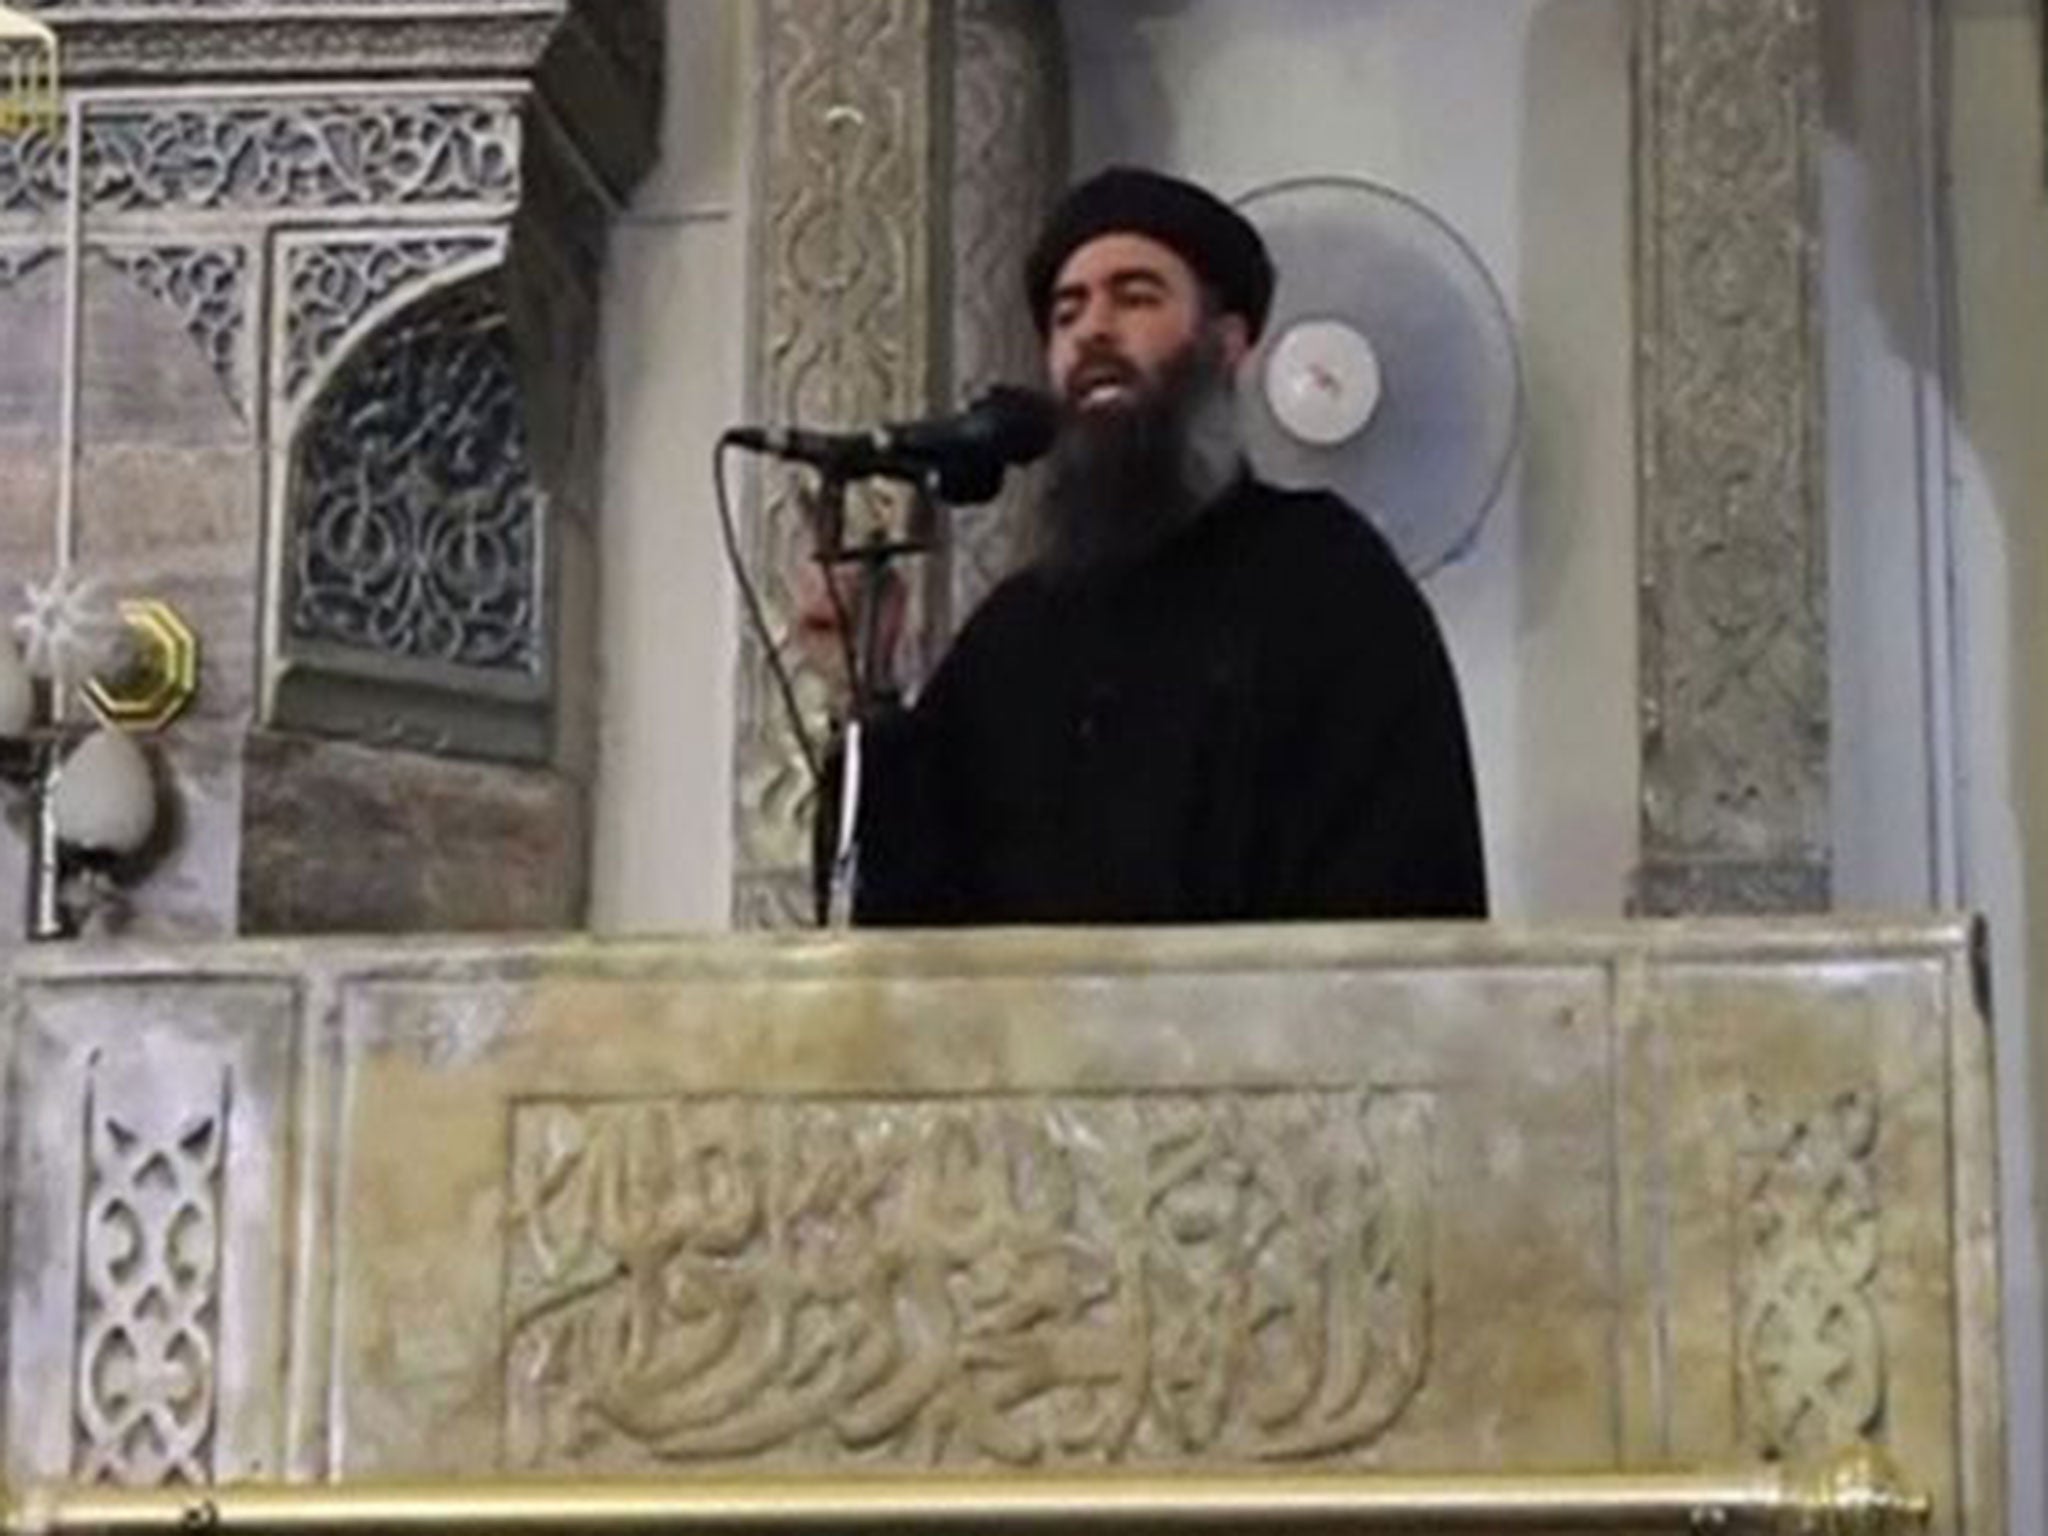 The reclusive Isis leader Abu Bakr al-Baghdadi preaches jihad at a mosque in the centre of Iraq’s second city, Mosul, according to a video recording posted on the internet